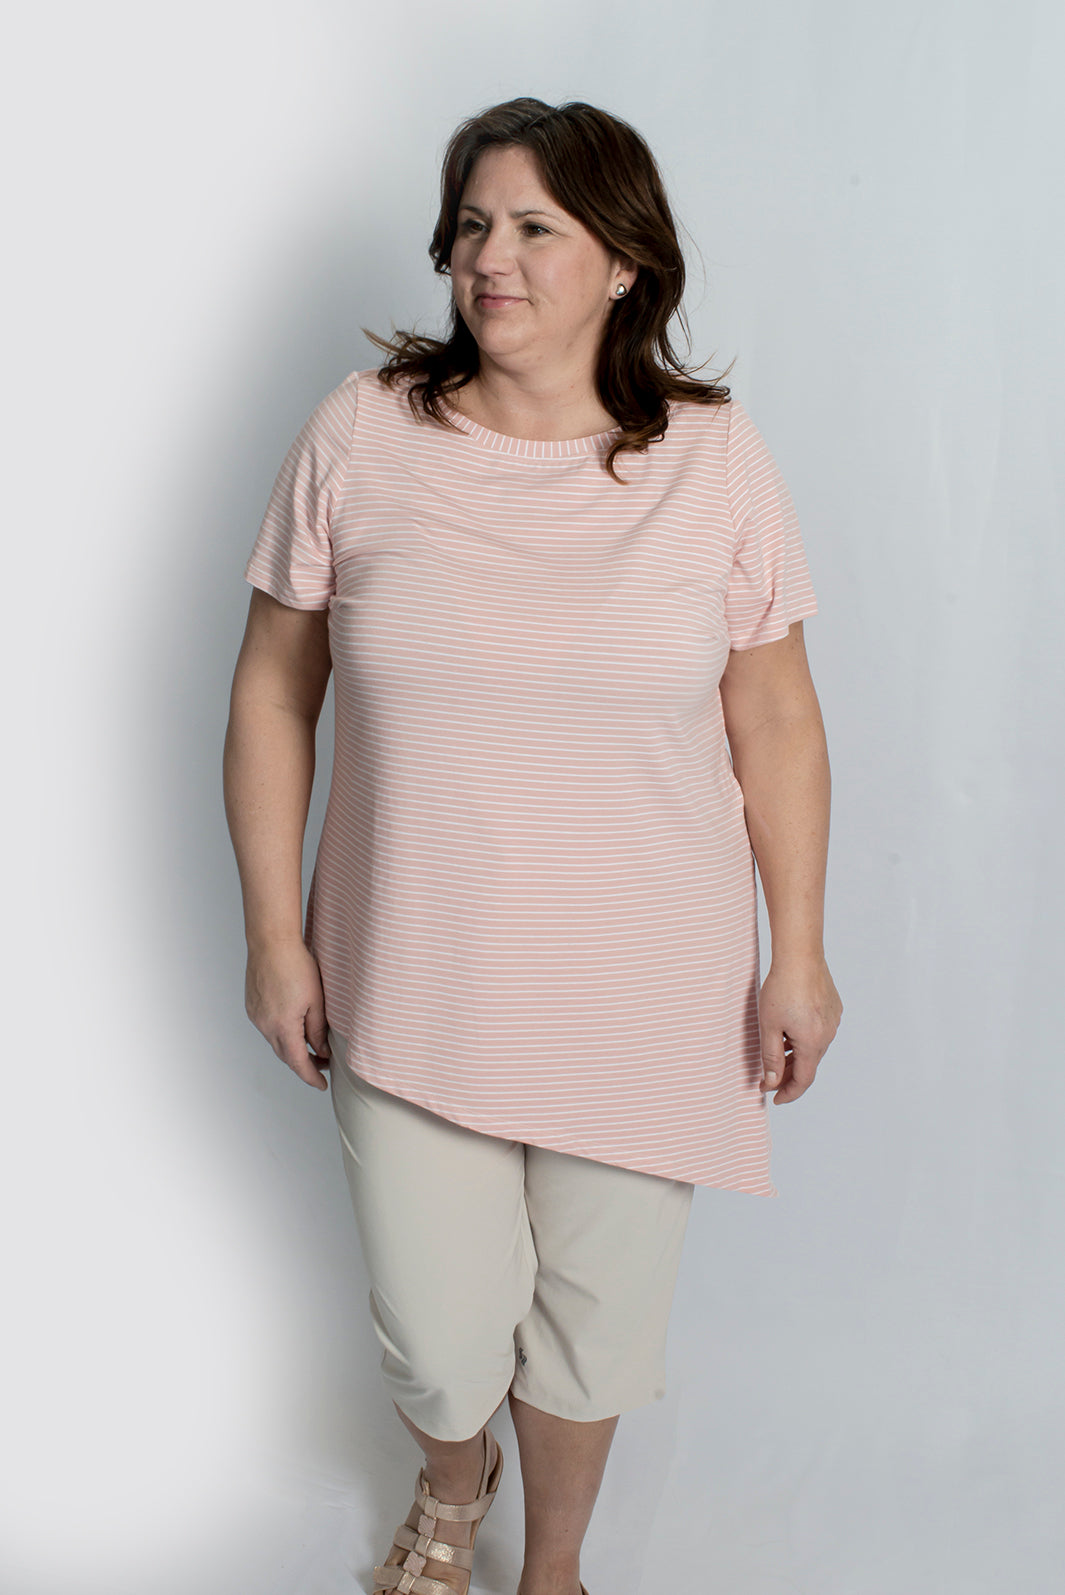 Chicout Short Sleeve Plus Size Tunic by Sportive Plus